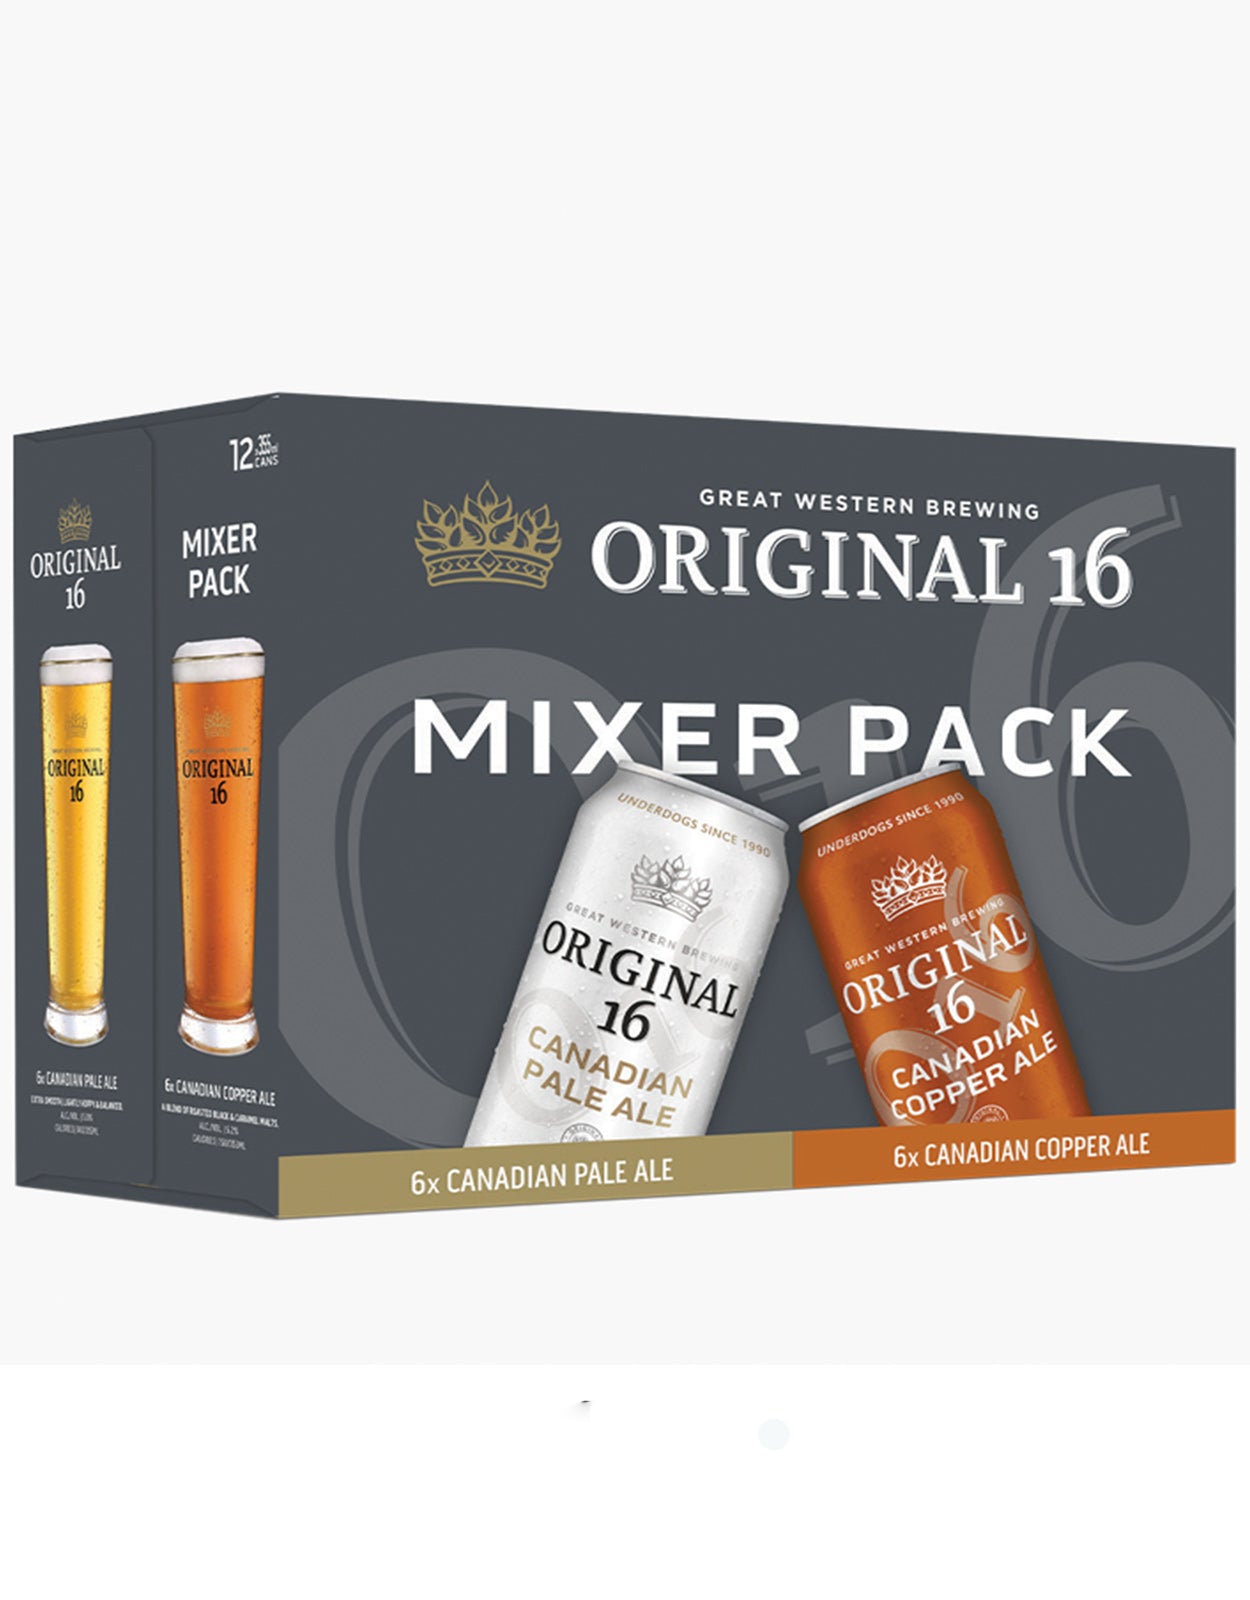 Great Western Original 16 Mixer Pack 355 ml - 12 Cans